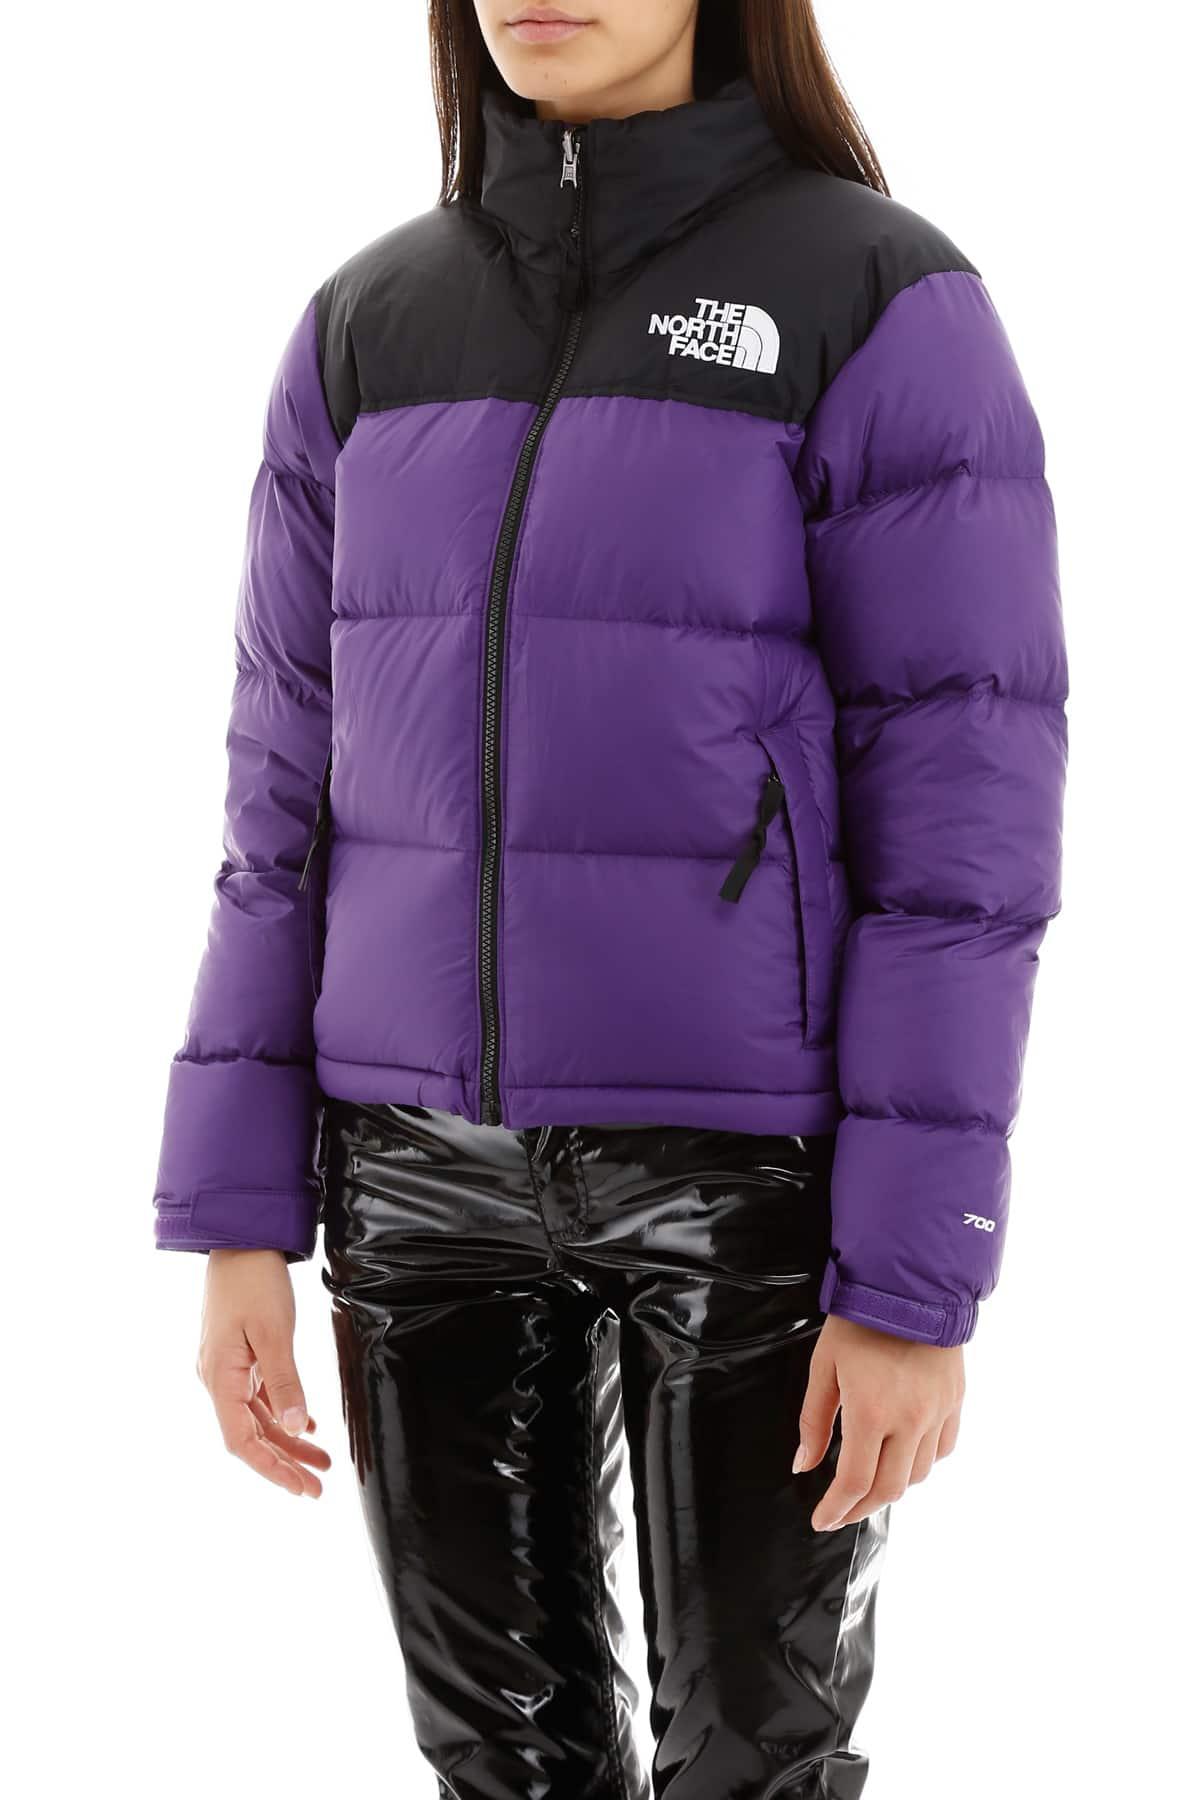 north face puffer jacket purple